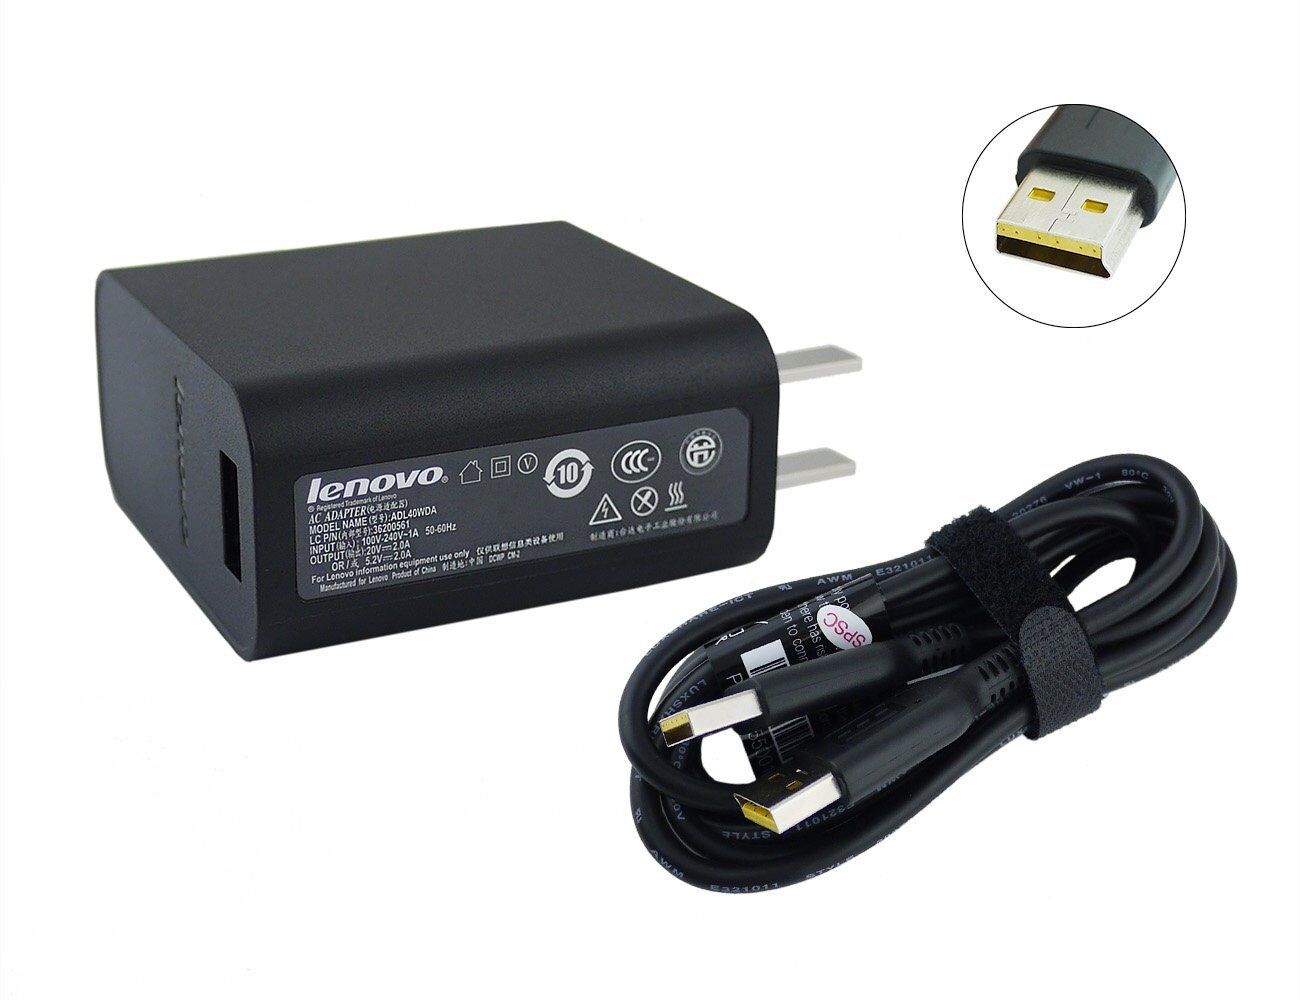 Lenovo 40W Yoga 3 Charger For Yoga 3 Pro-1370 Yoga 3-1170 Yoga 3-1470 AC Adapter Country/Region of Manufacture: China